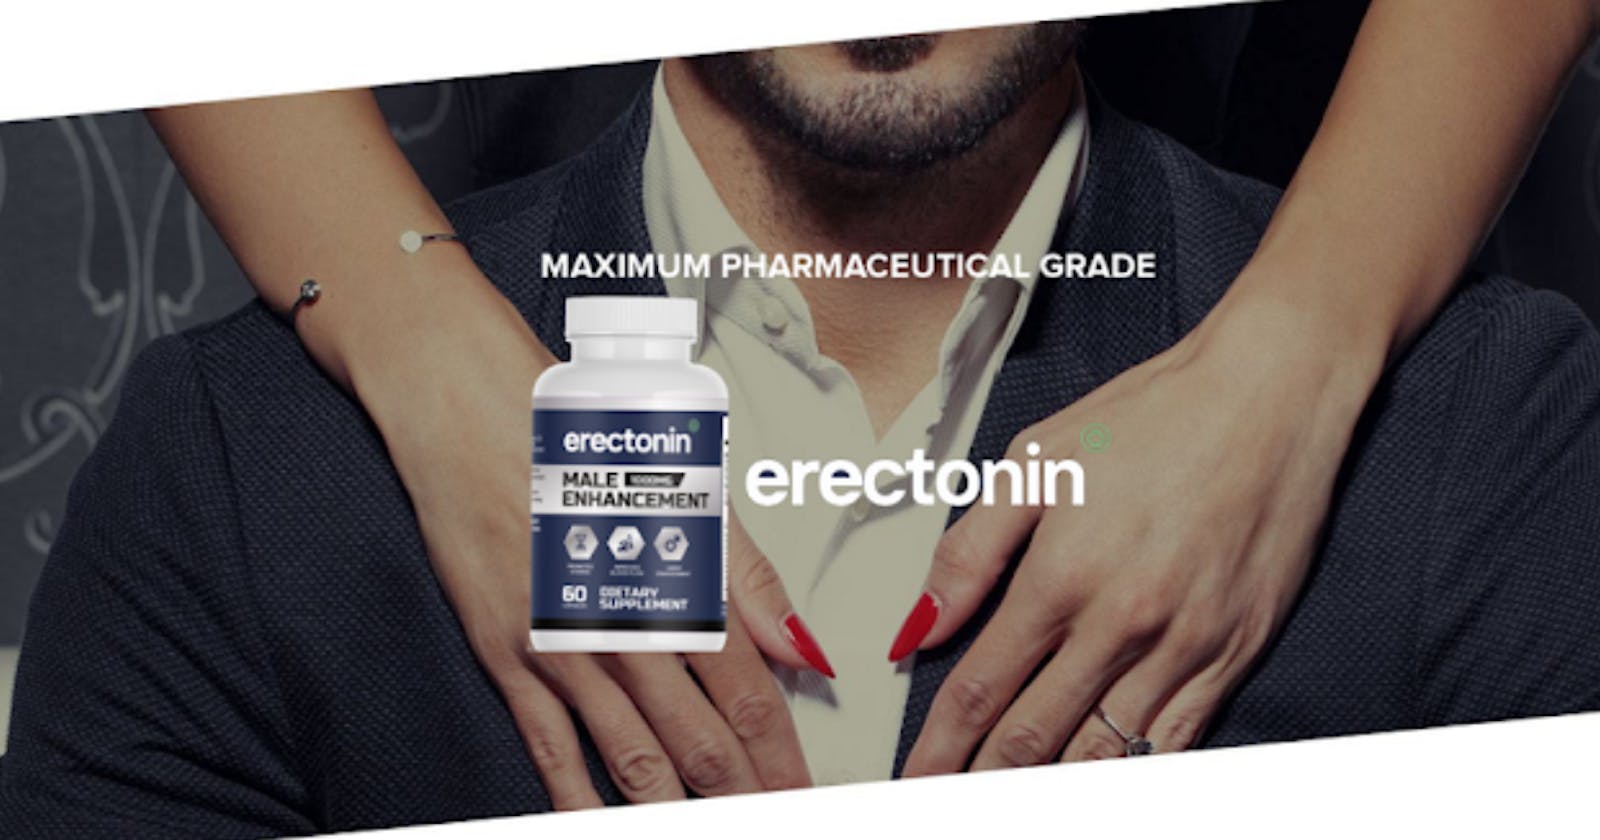 Erectonin Male Enhancement Reviews 2023 | Is It Worth Buying? | Buy From Official Site?